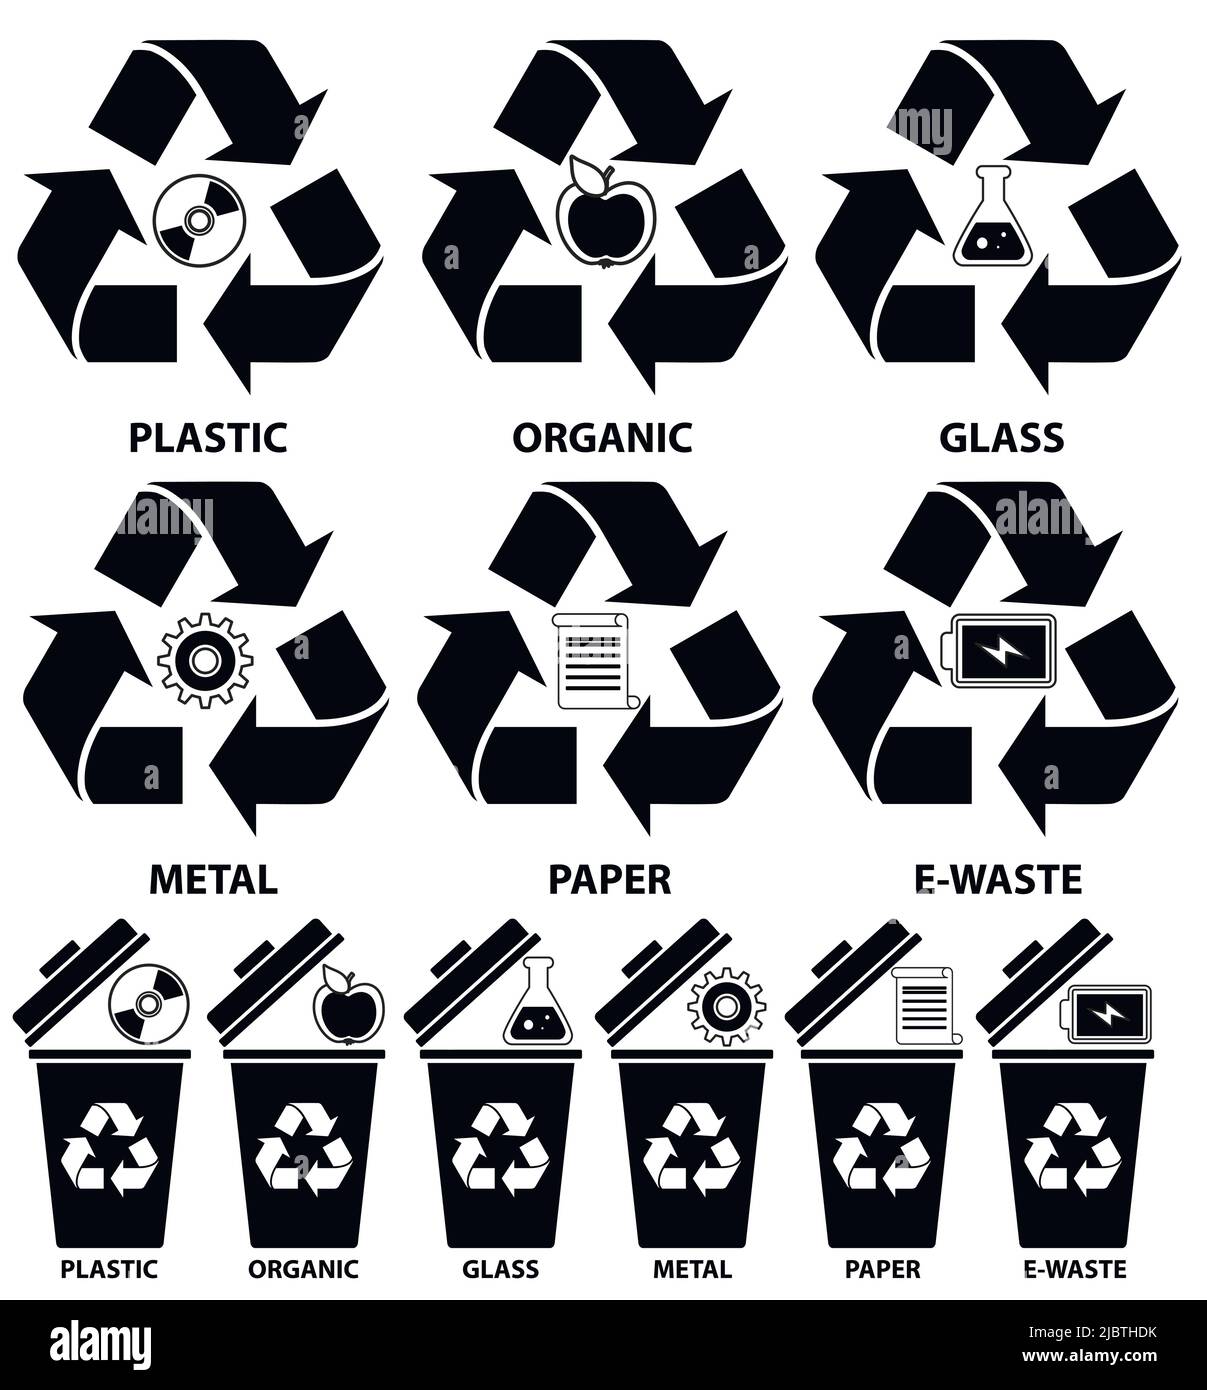 Rubbish bin icons with different types of garbage: Organic, Plastic, Metal, Paper, Glass, E-waste for recycling concept in flat style. Stock Vector